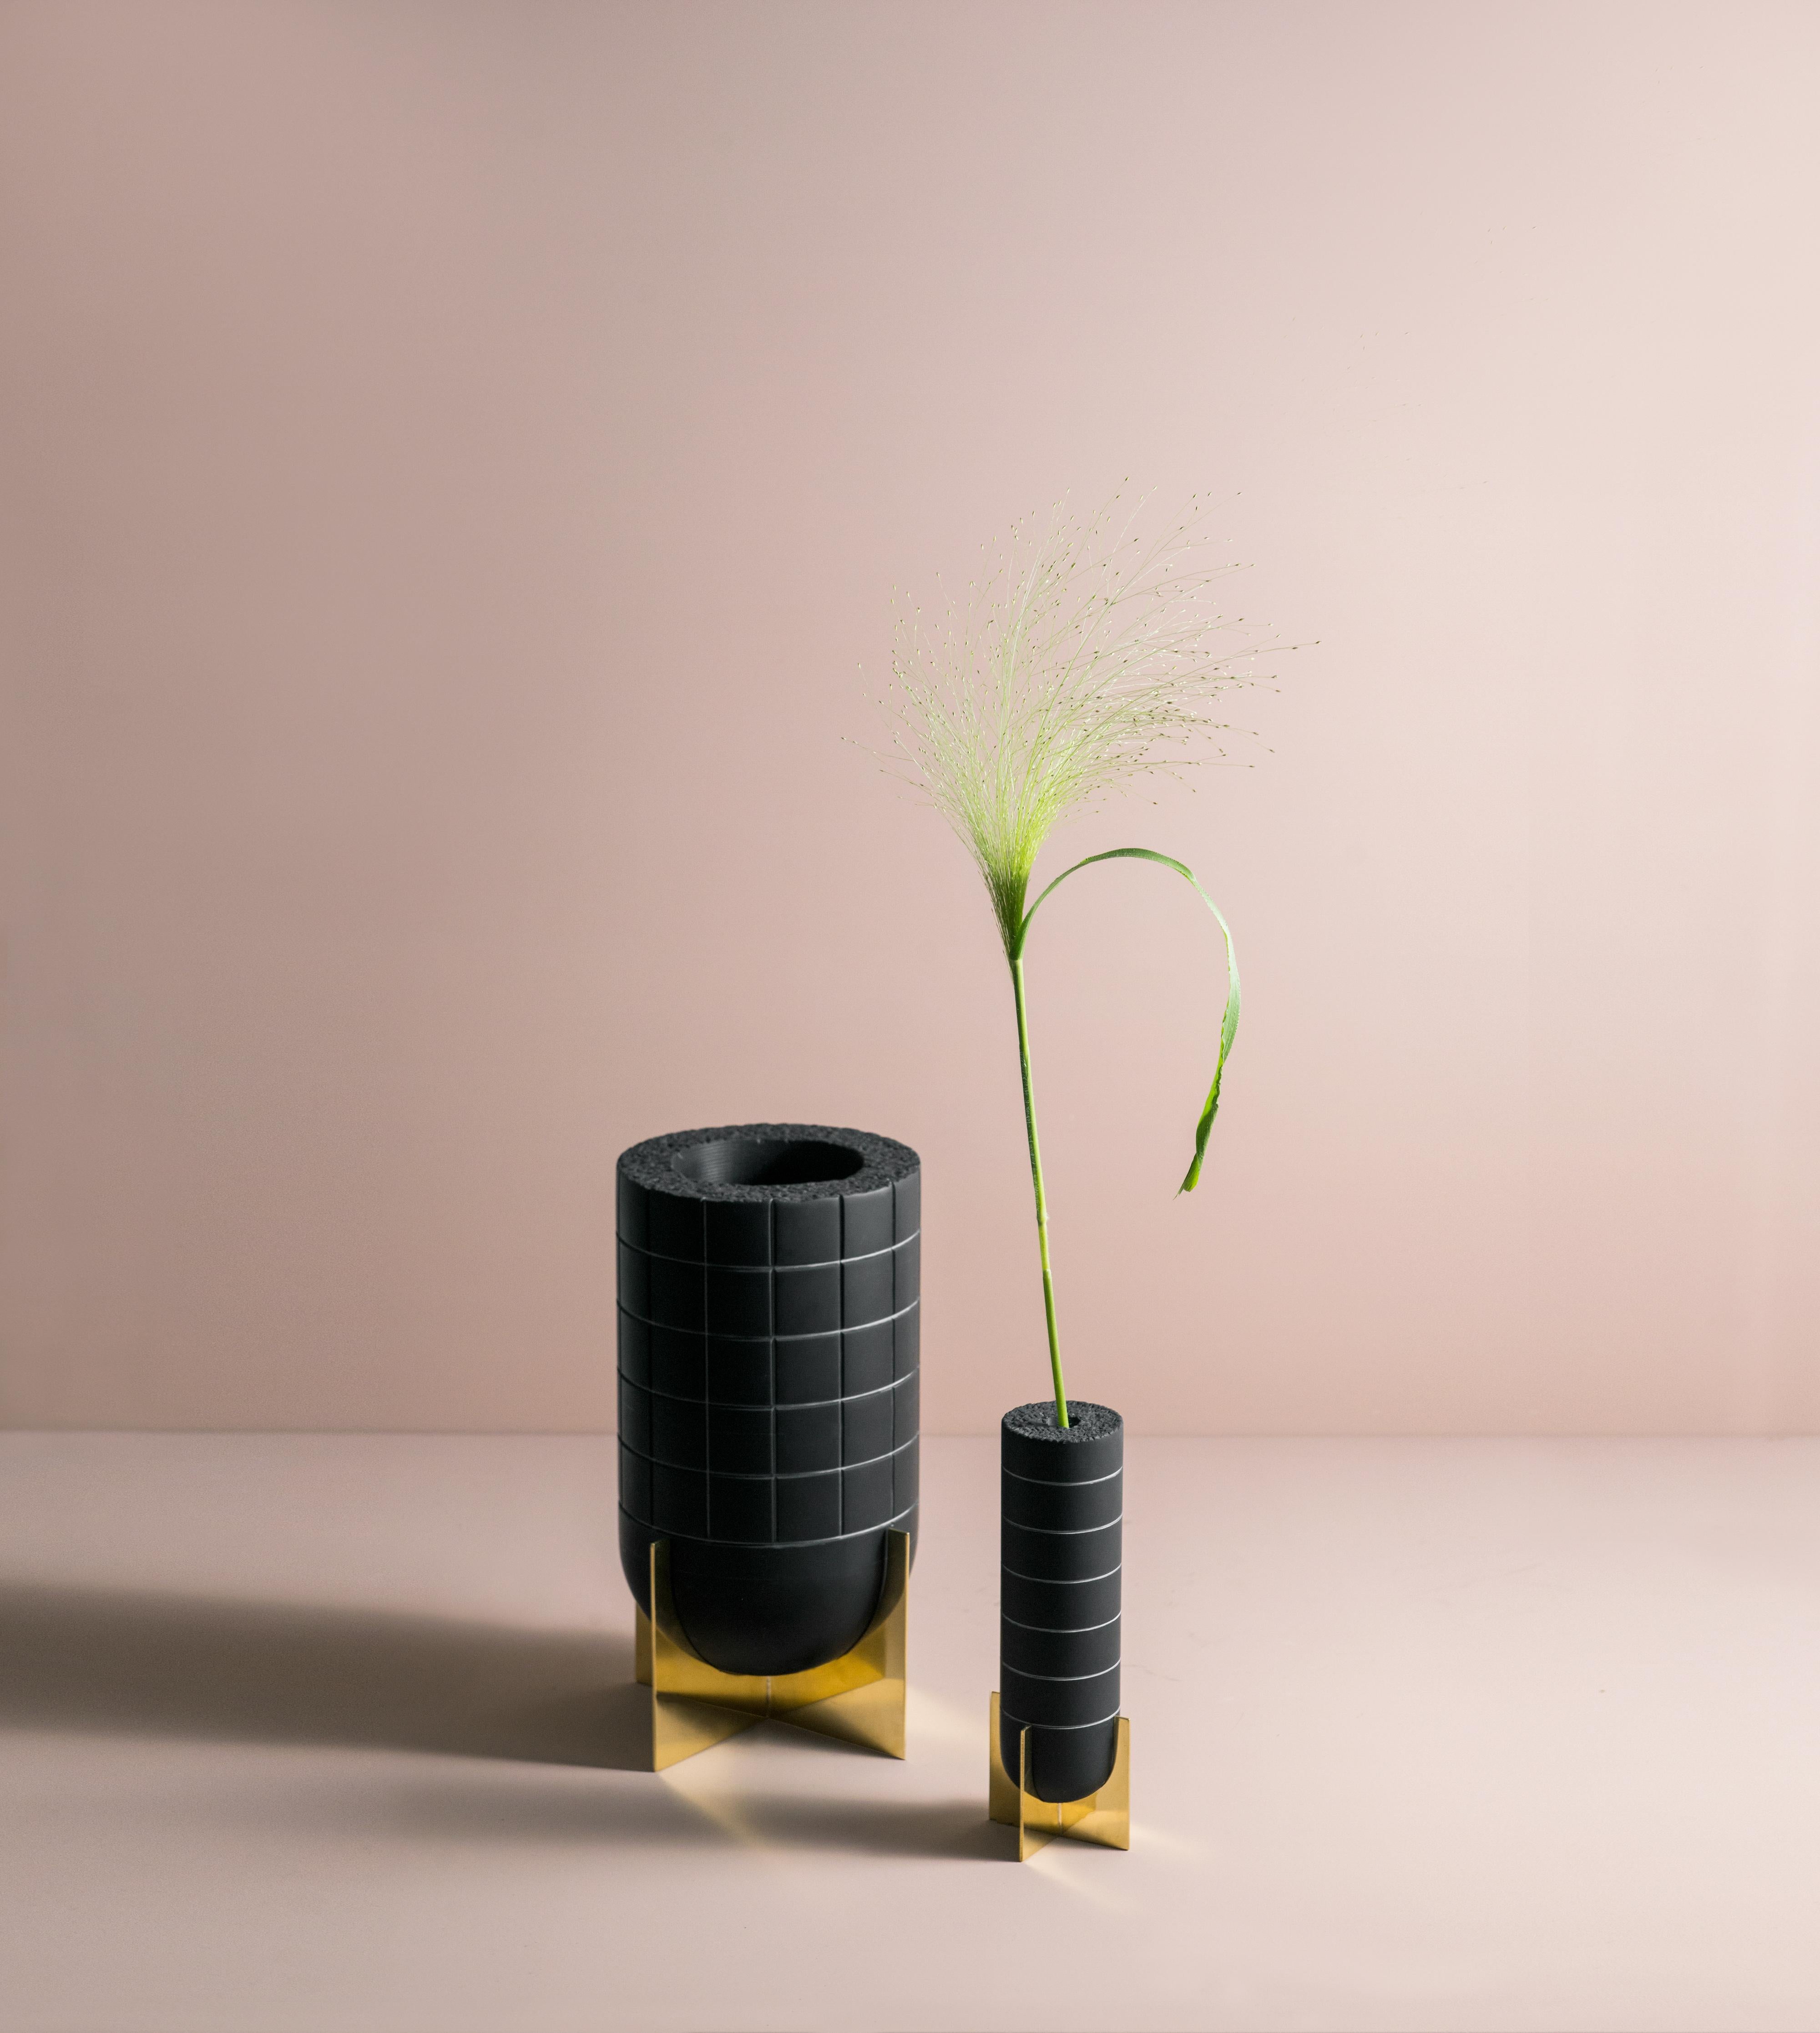 Cavi vases collection is the result of research conducted on the processign techniques
of Lavagna stone where raw elements and precious details celebrate a locally sourced material by creating objects which juxtapose balancing and contrasting